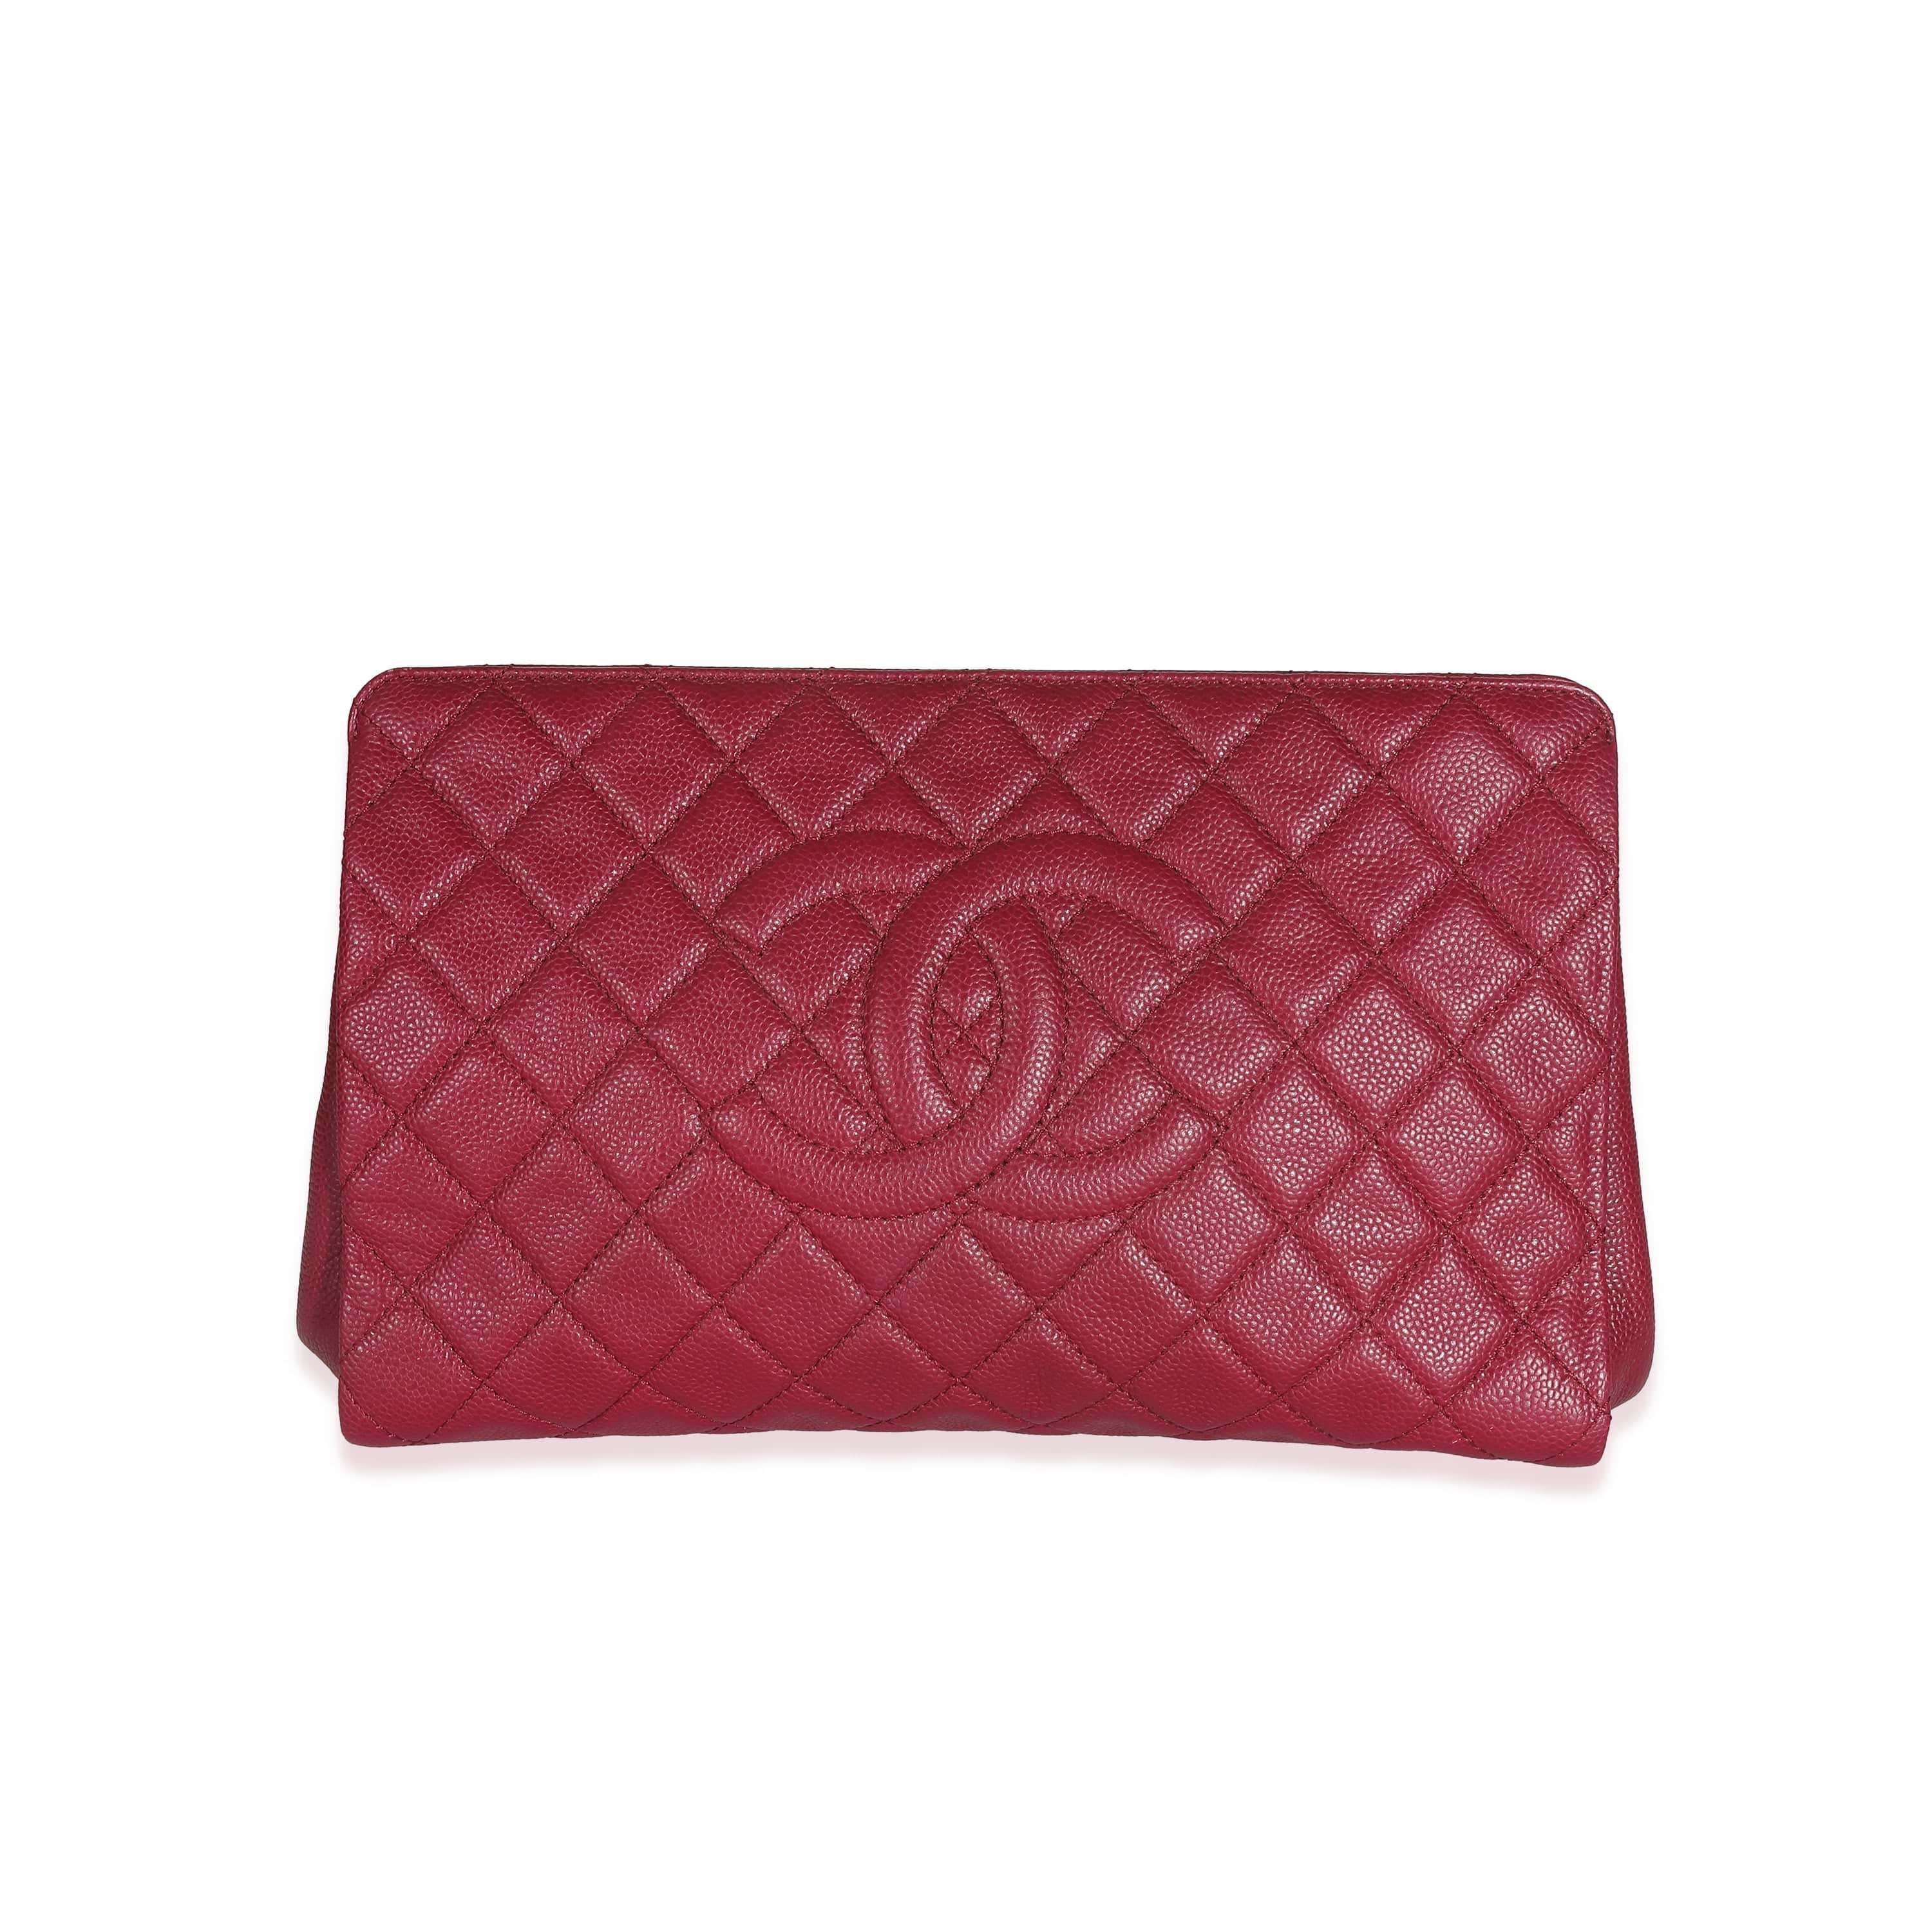 Chanel Chanel Dark Pink Quilted Caviar CC Timeless Frame Clutch